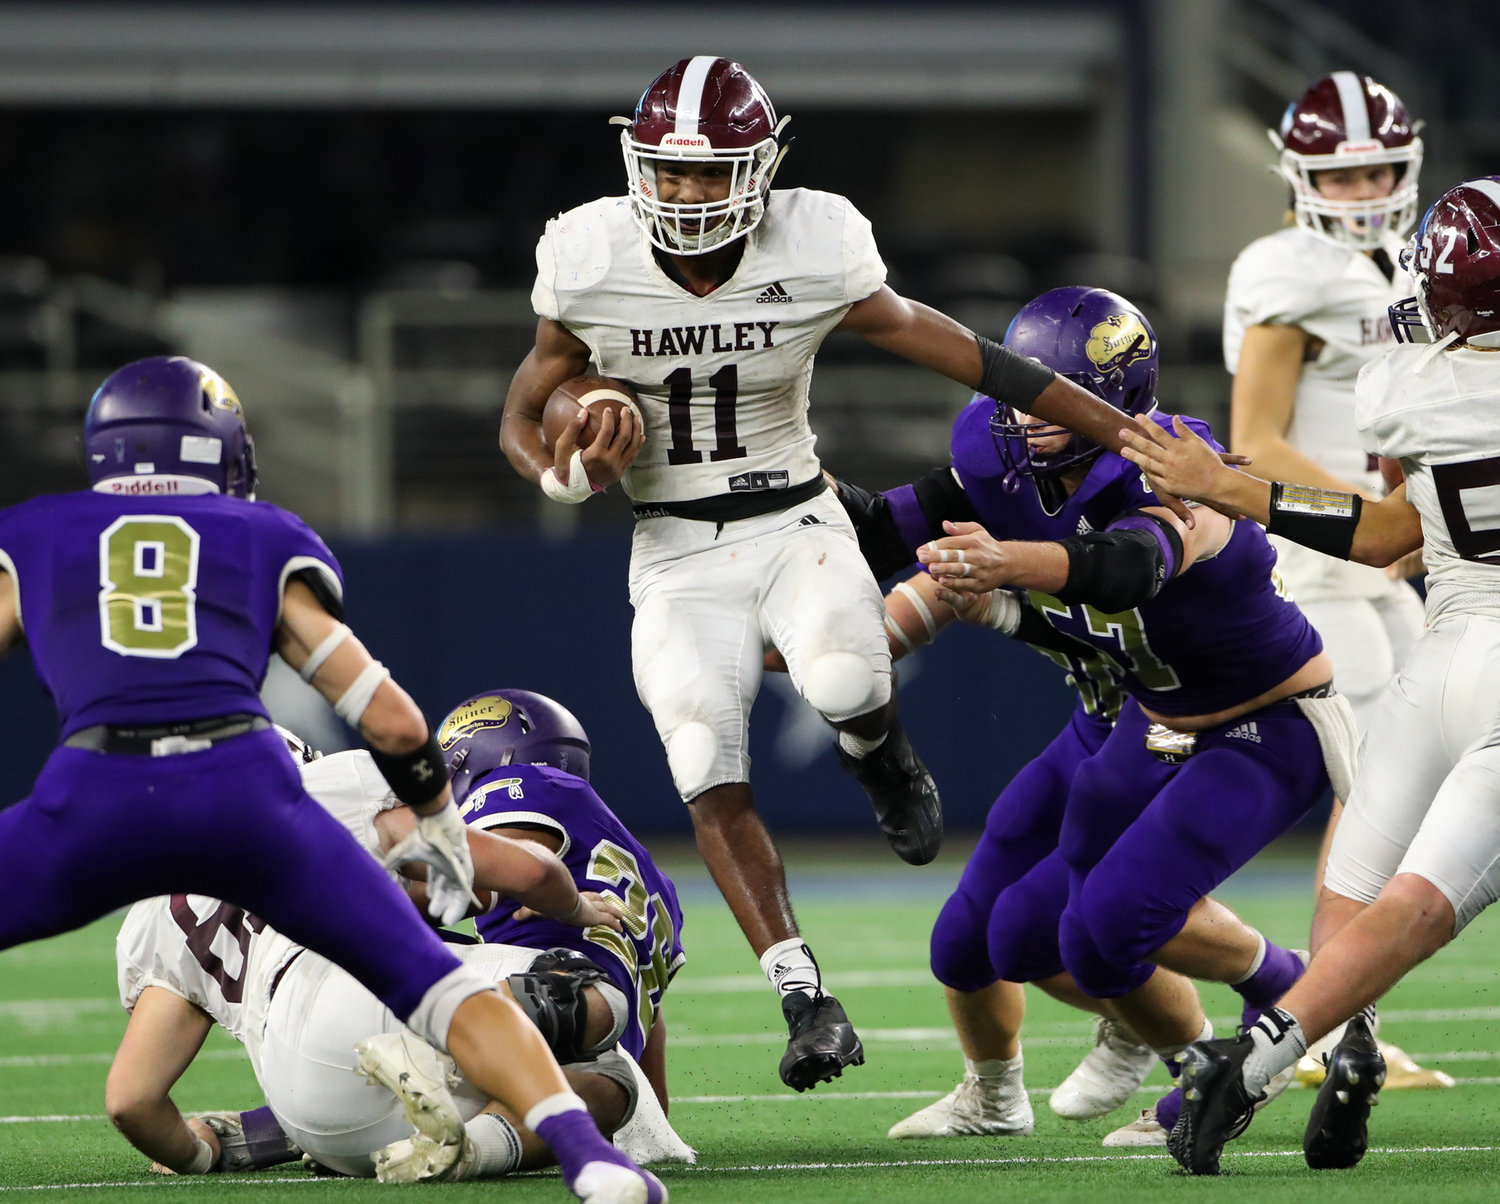 Hawley Bearcats sophomore Diontay Ramon (11) carries the ball during the Class 2A Division I state football championship game between Shiner and Hawley on December 15, 2021 in Arlington, Texas.